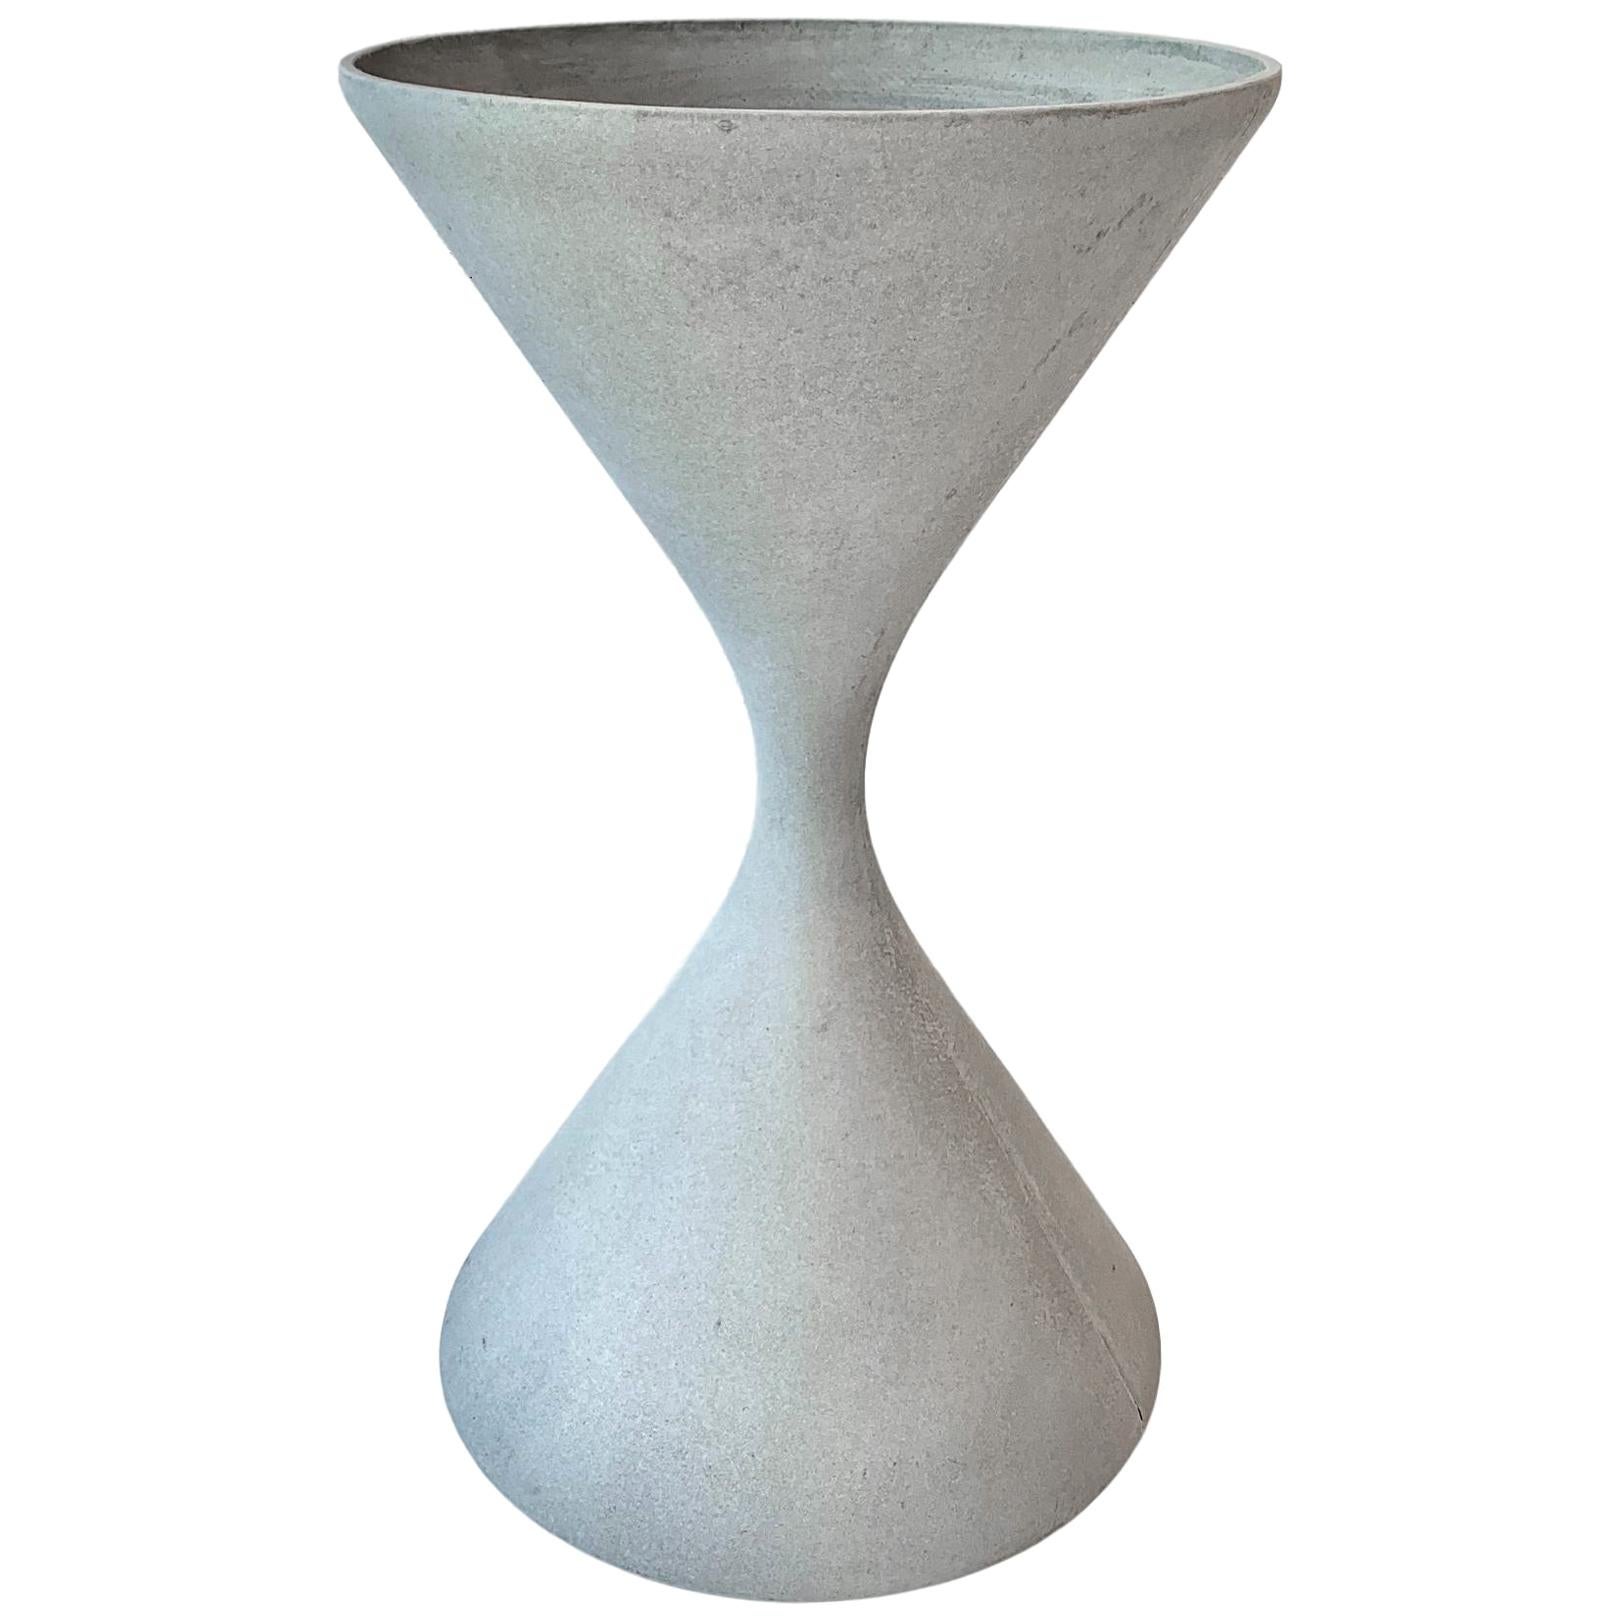 Willy Guhl New Production Spindel Hourglass Planters For Sale